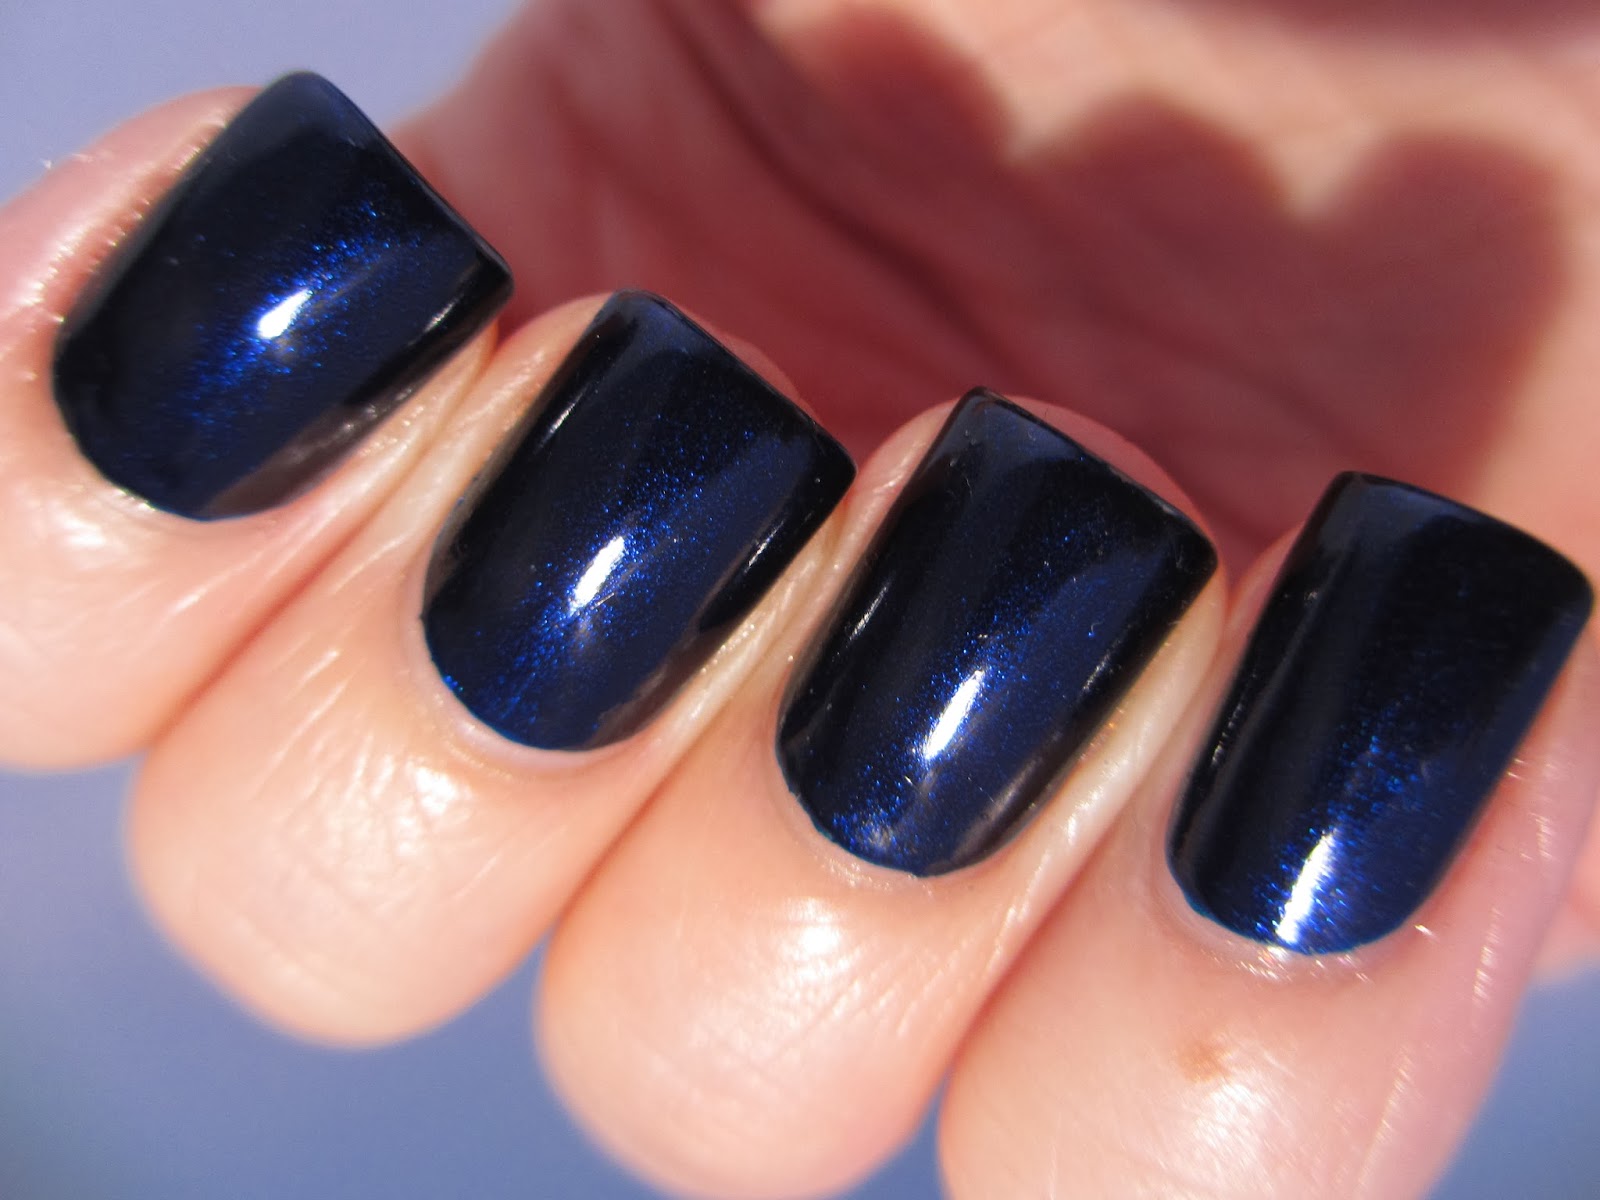 6. "How to Choose the Right Nail Polish Color for a Navy Blue Gown" - wide 3